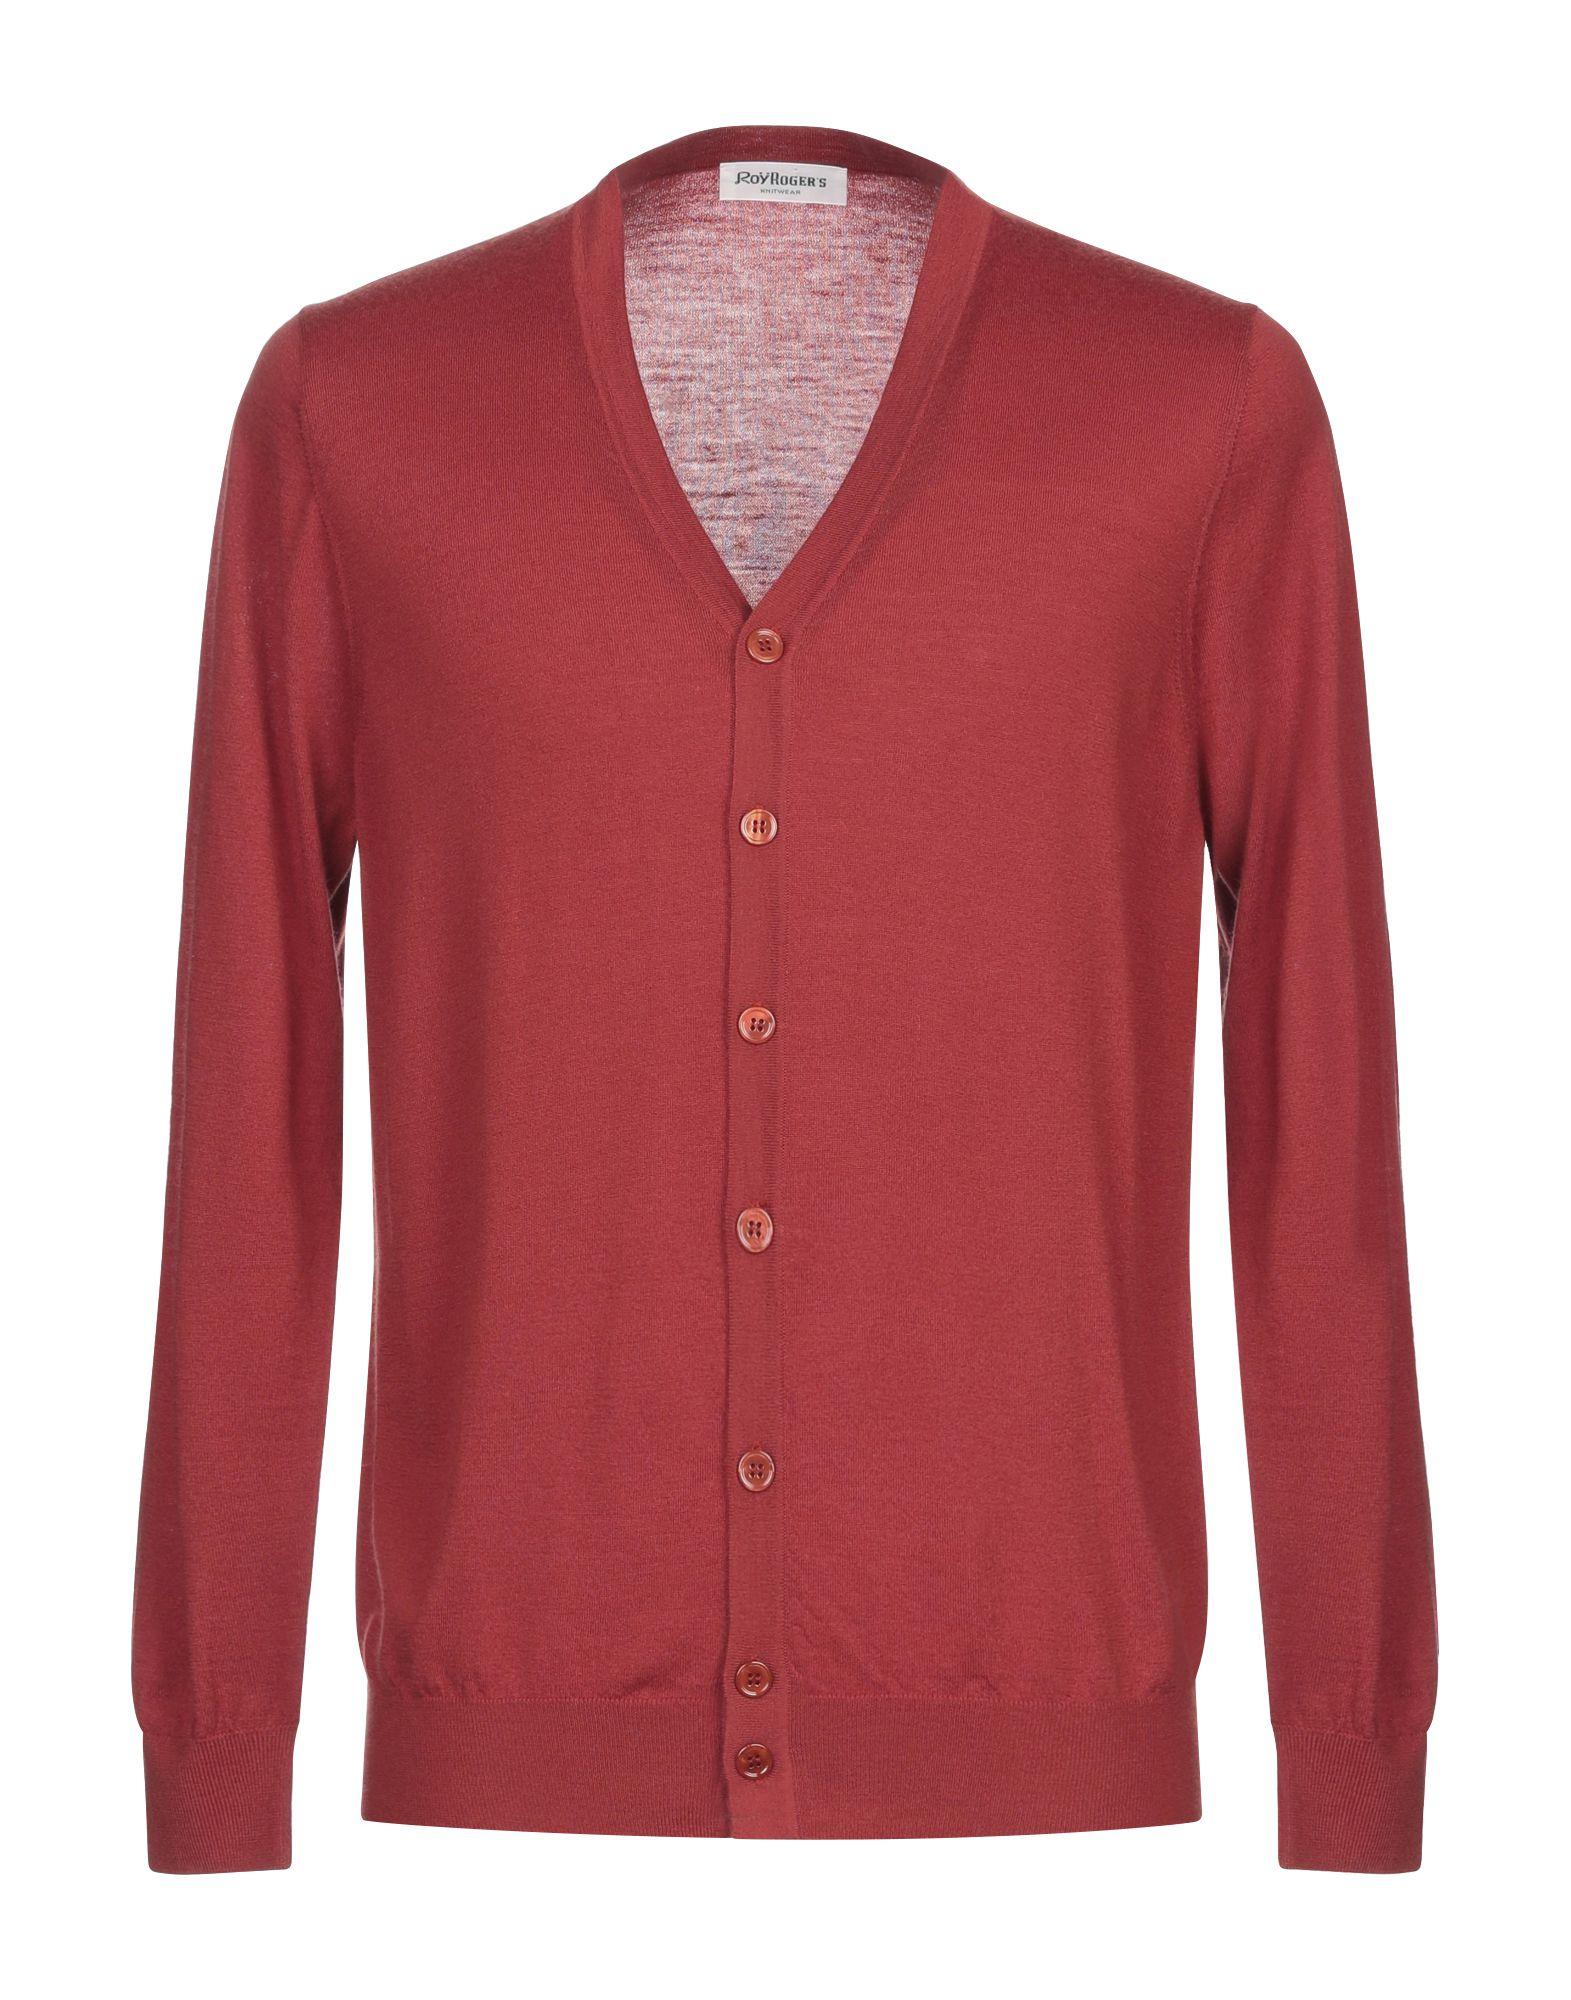 Roy Rogers Wool Cardigan in Brick Red (Red) for Men - Lyst